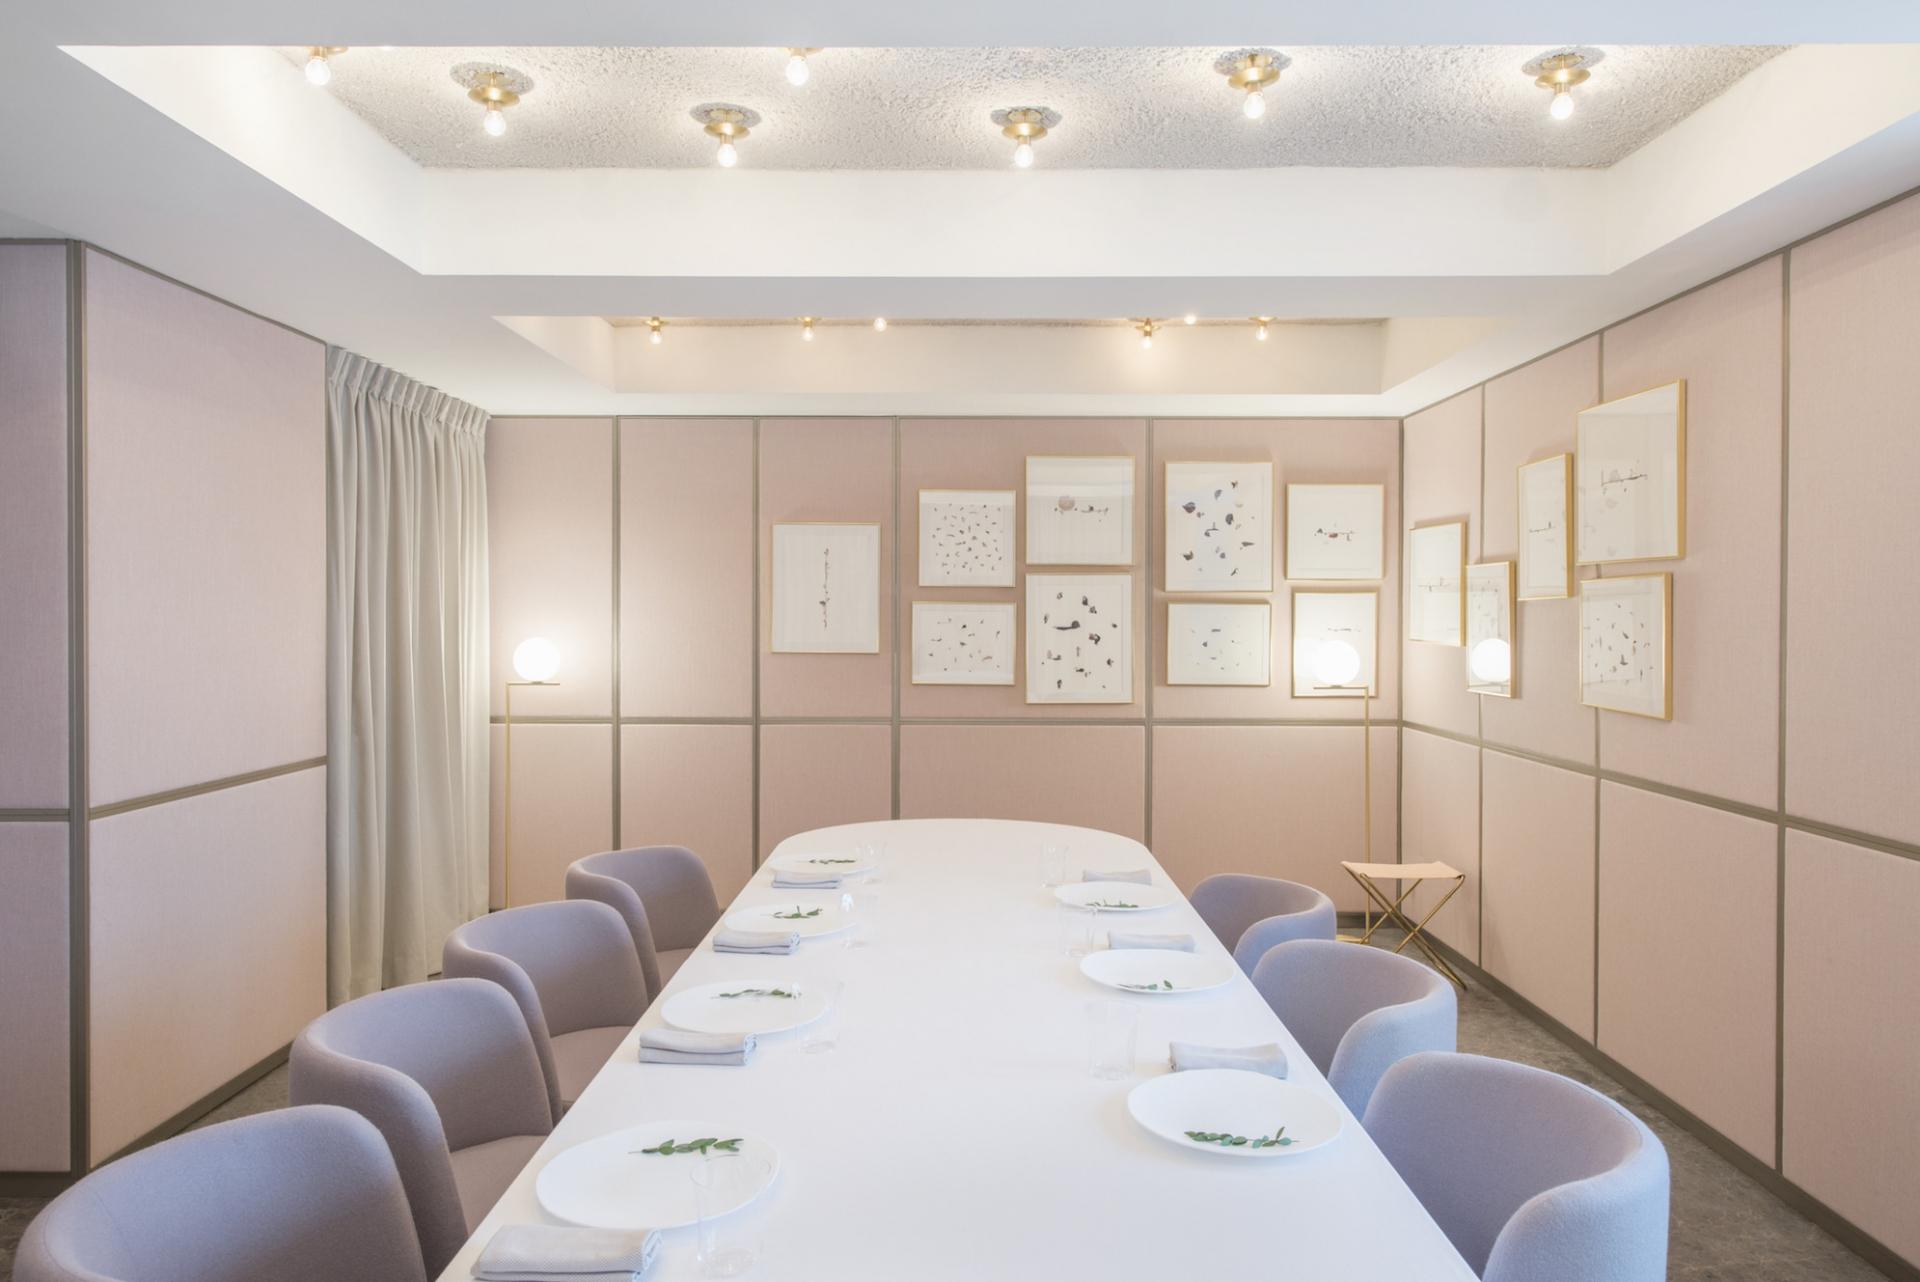 A private dining room adorned with artworks by Dawn Ng